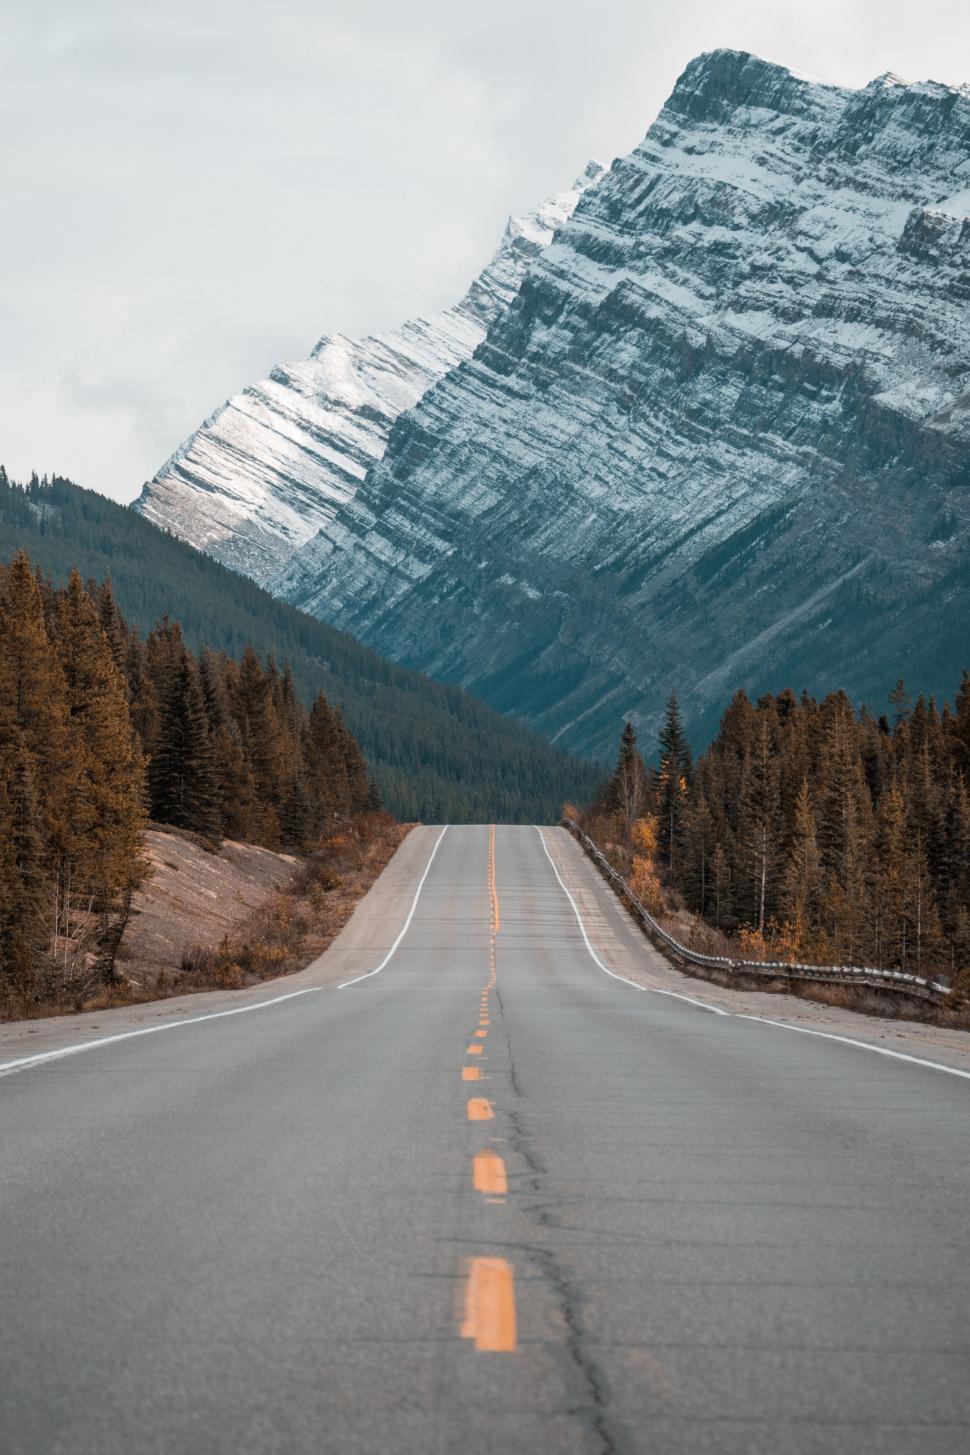 Free Image of Mountainous Road Leading Into Snow-Capped Peaks 